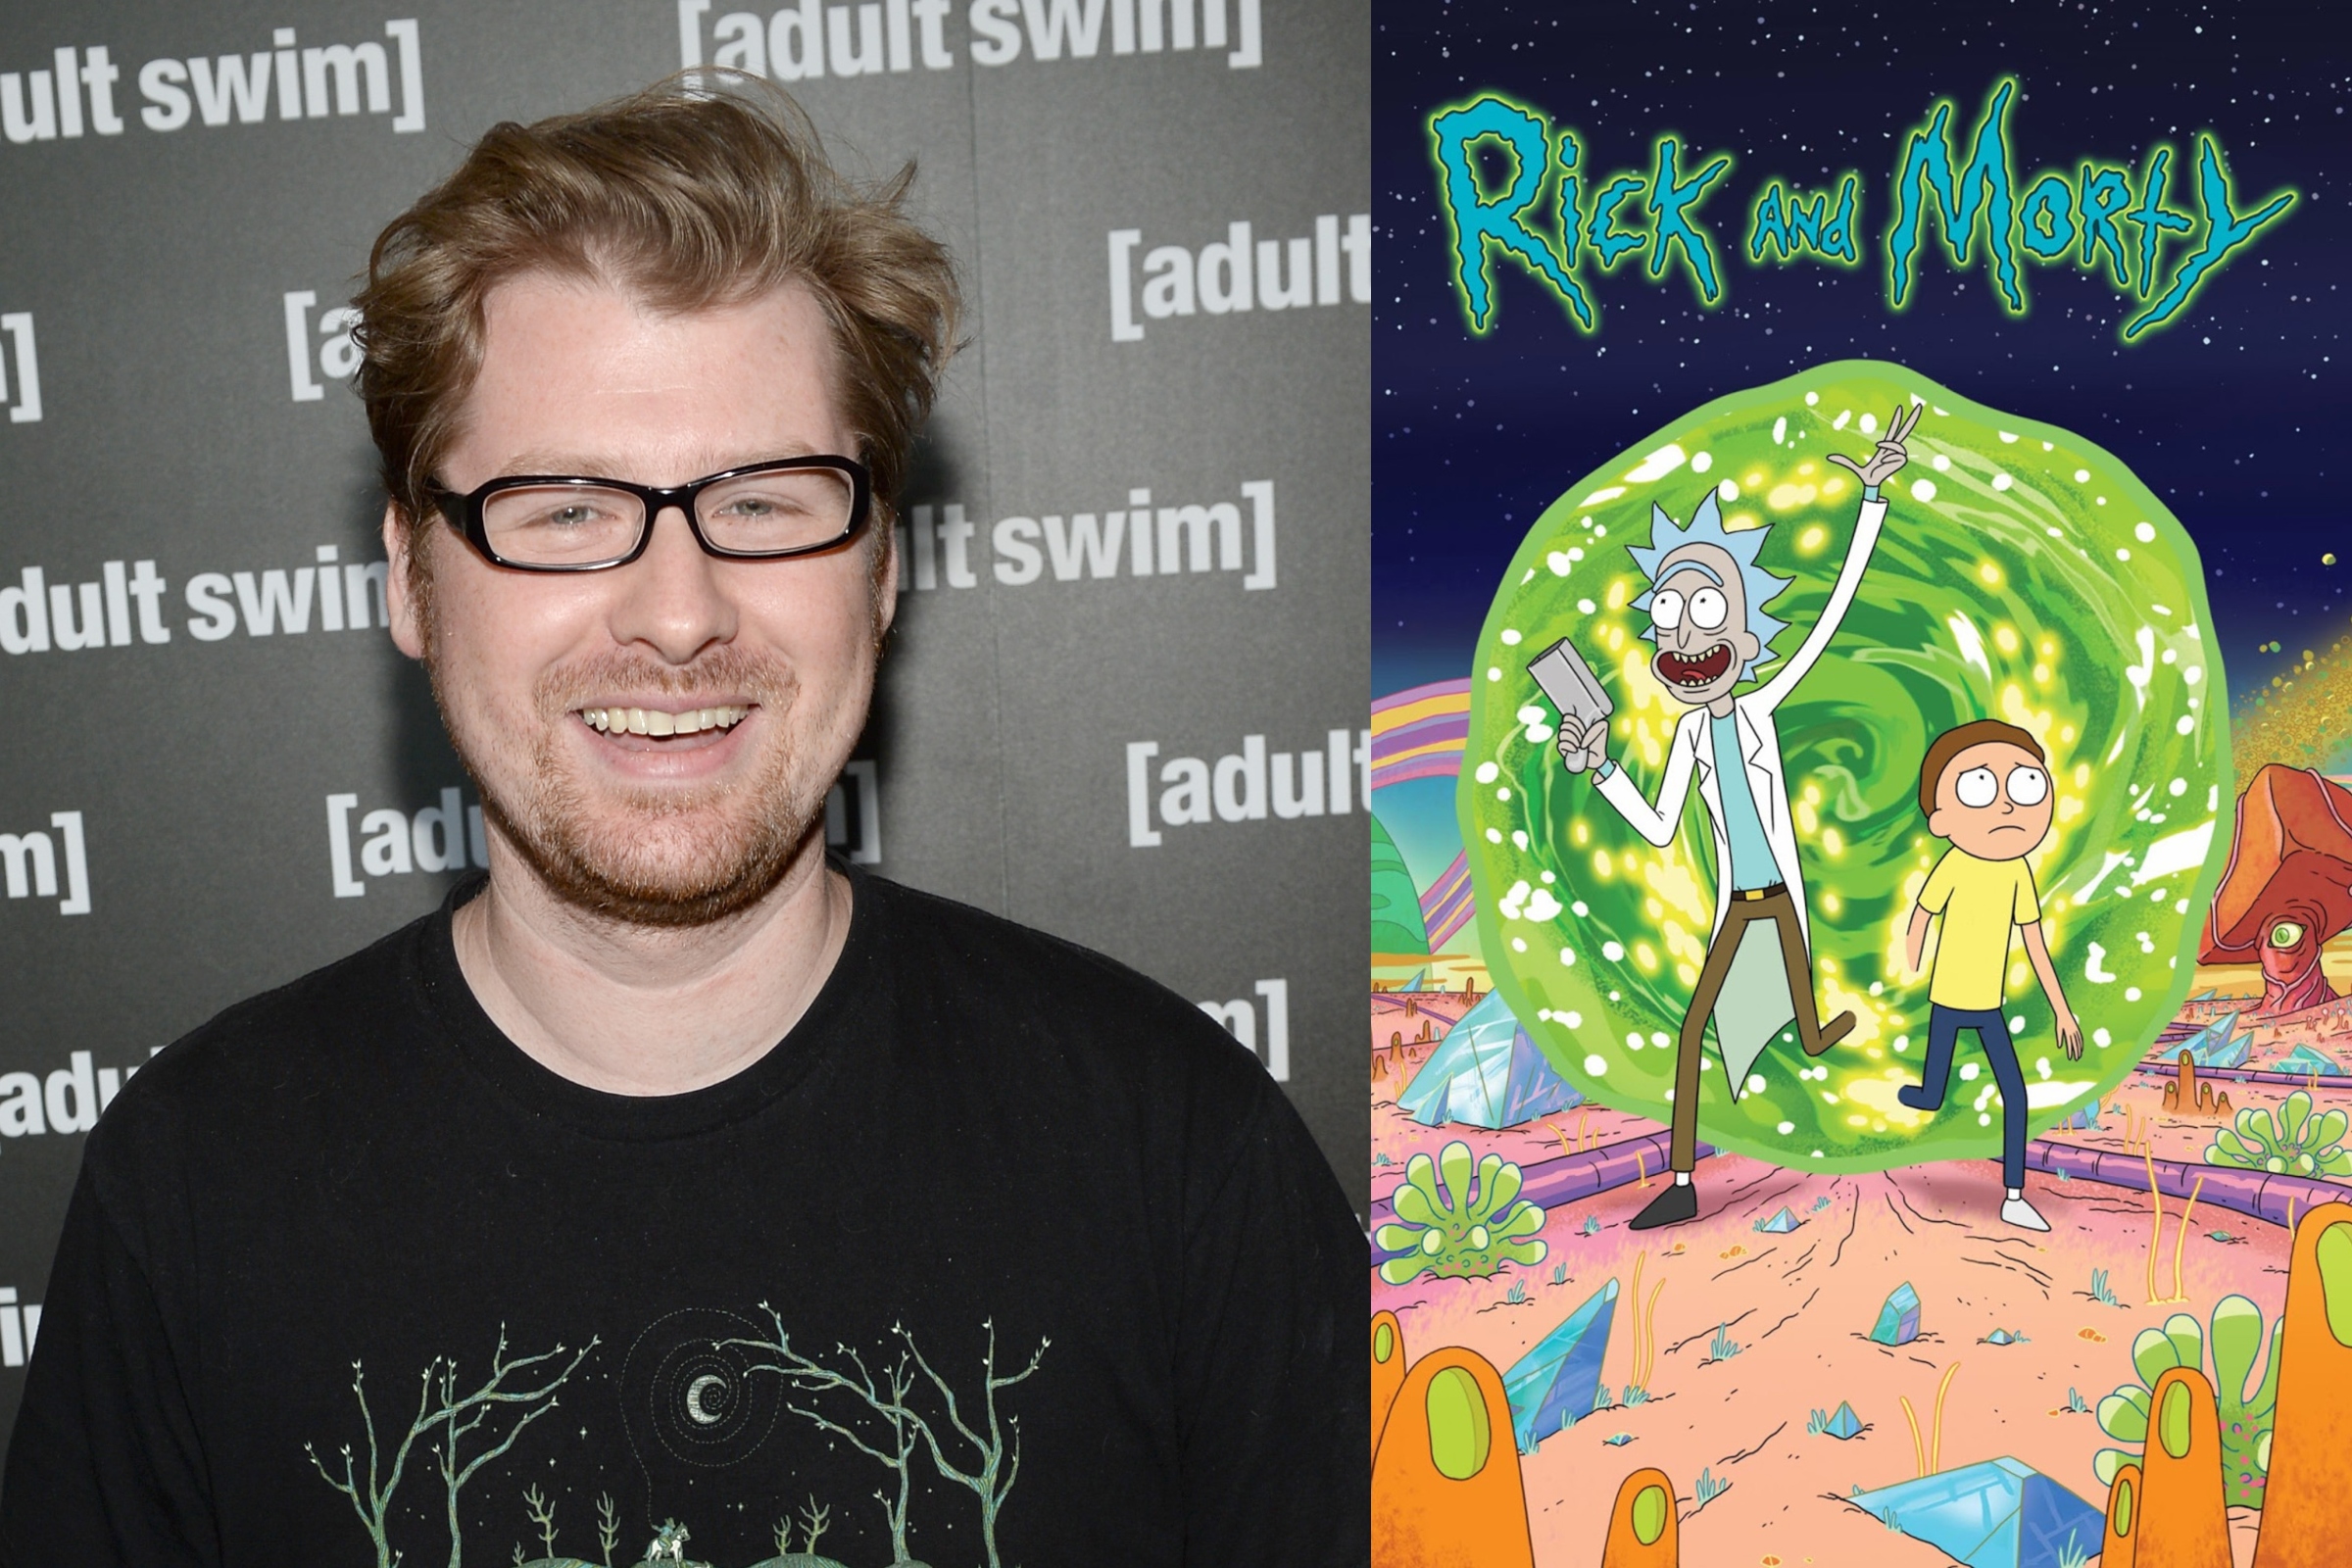 Rick and Morty' Future in Doubt as Justin Roiland Faces Years in Prison